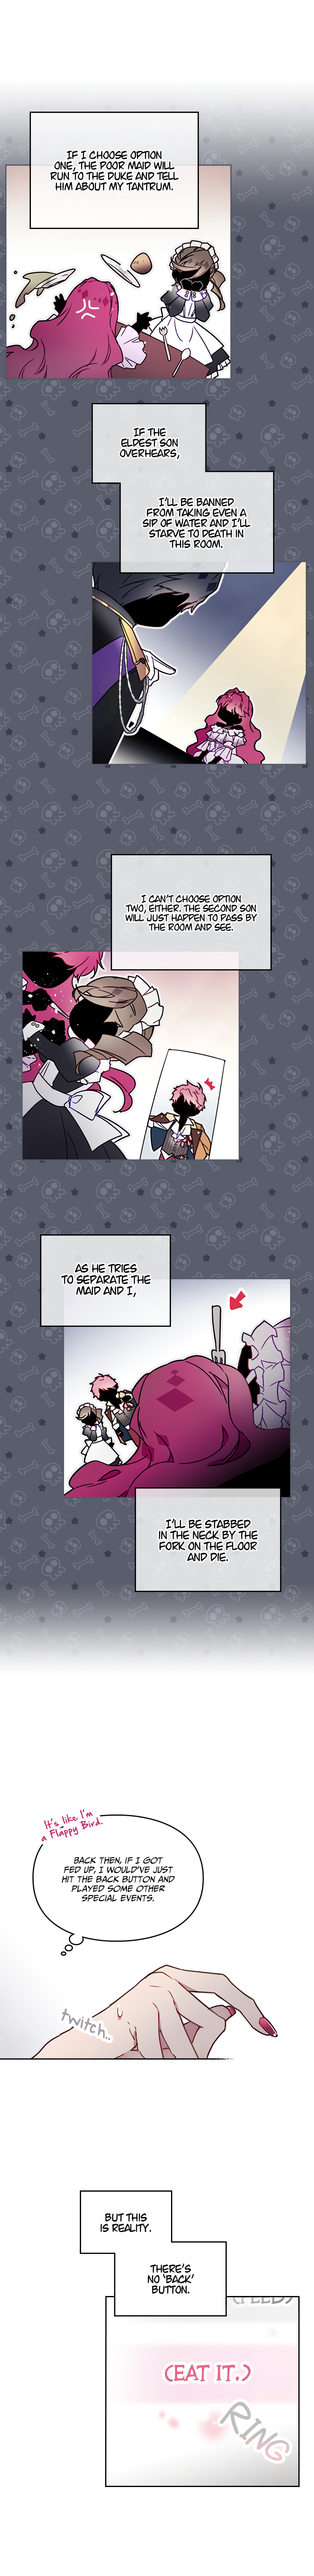 Death Is The Only Ending For The Villainess - Page 2